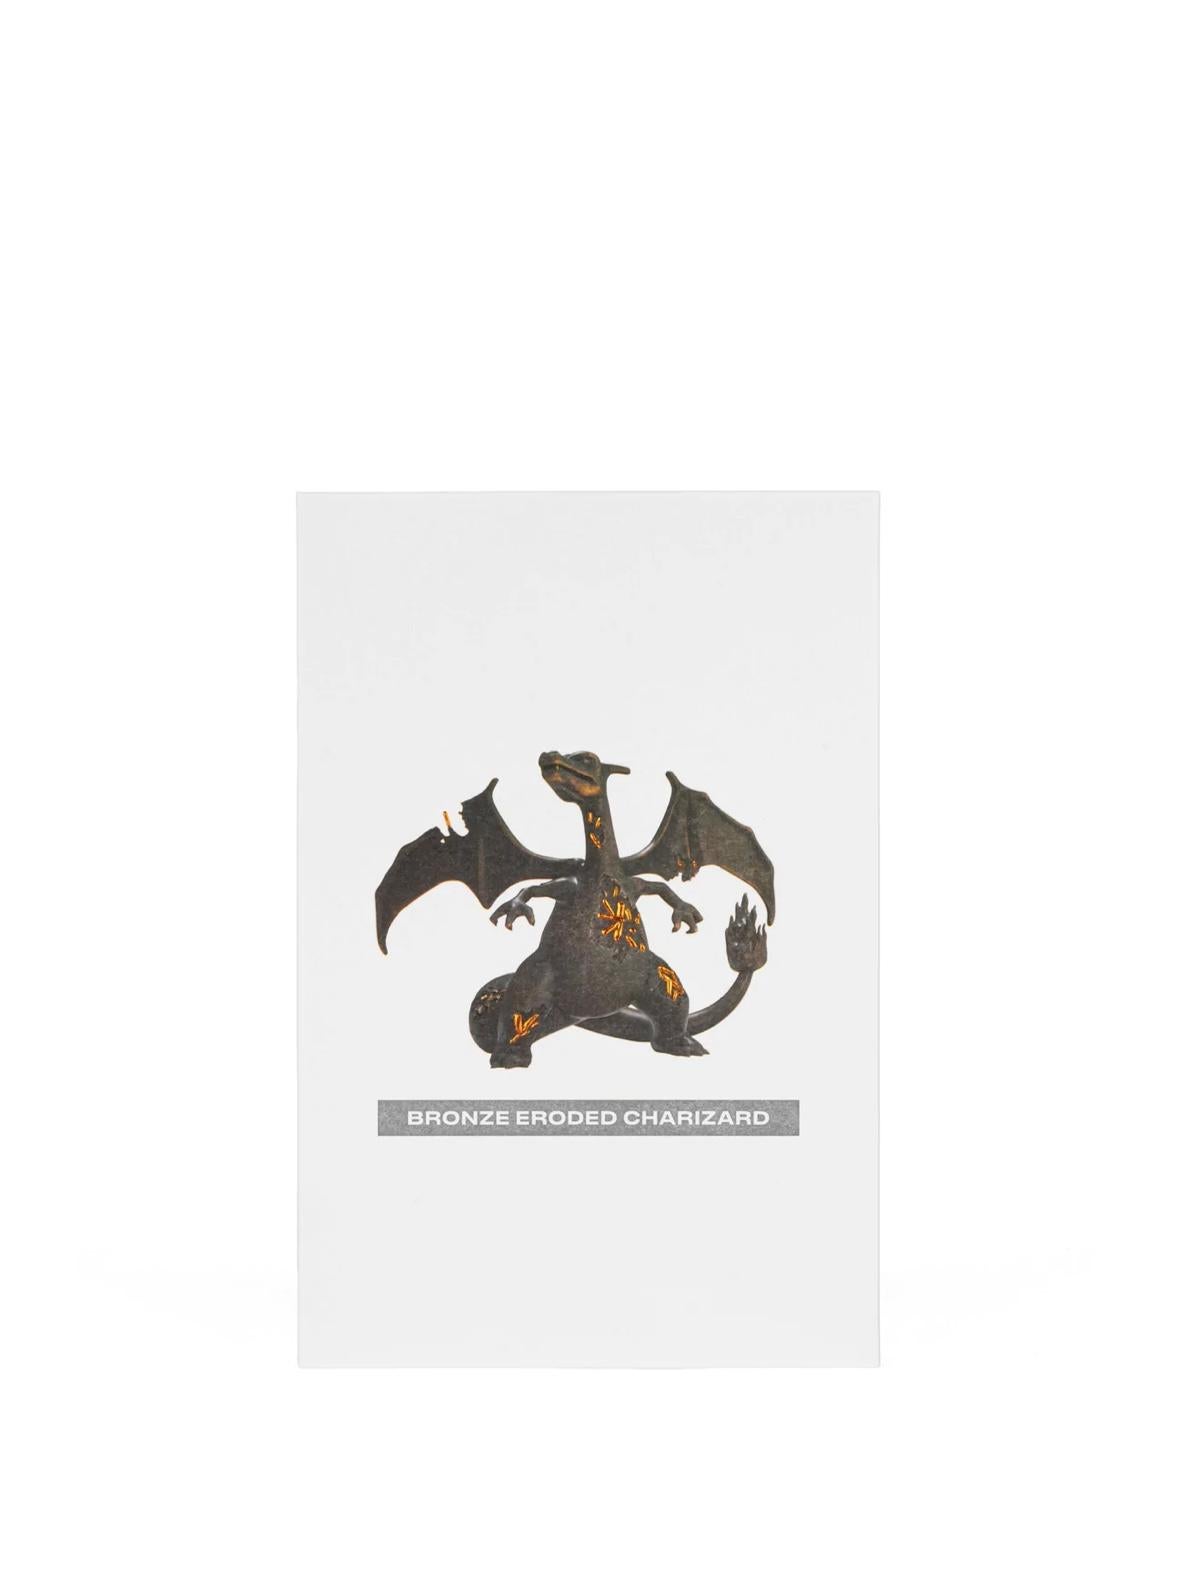 BRONZE CRYSTALIZED CHARIZARD is a sculpture that has been reimagined as a relic of Kanto uncovered through the passage of time. Made of cast bronze hand-finished with a custom black oil patina; Arsham's first time using this finish. The cast Bronze